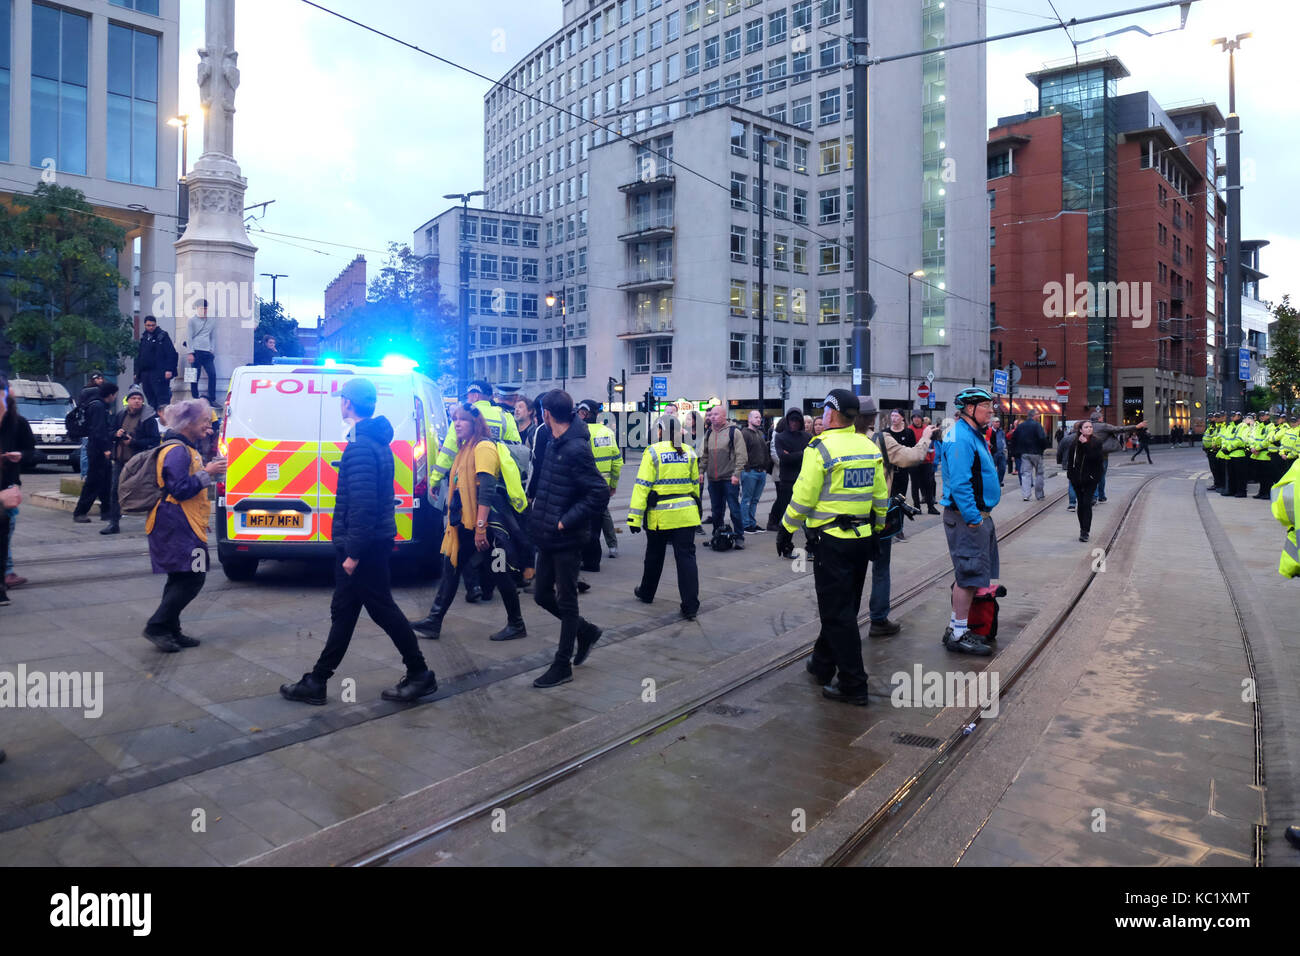 St Peters Square, Manchester, UK - Sunday 1st October 2017 - A Police van takes away one arrested demonstrator as Police deal with protesters outside the Conservative Party Conference. Photo Steven May / Alamy Live News Stock Photo